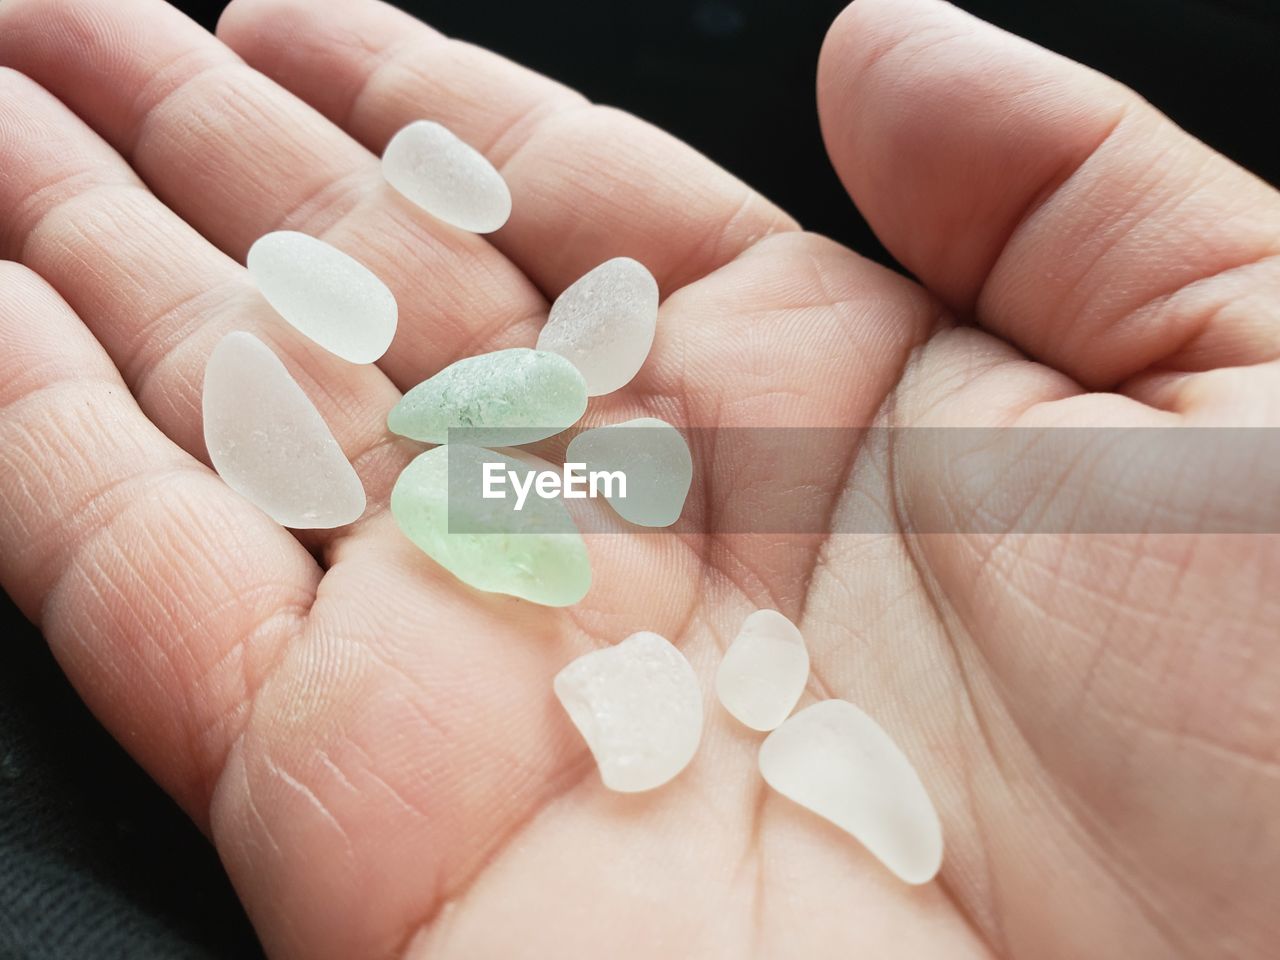 Cropped image of person holding crystals